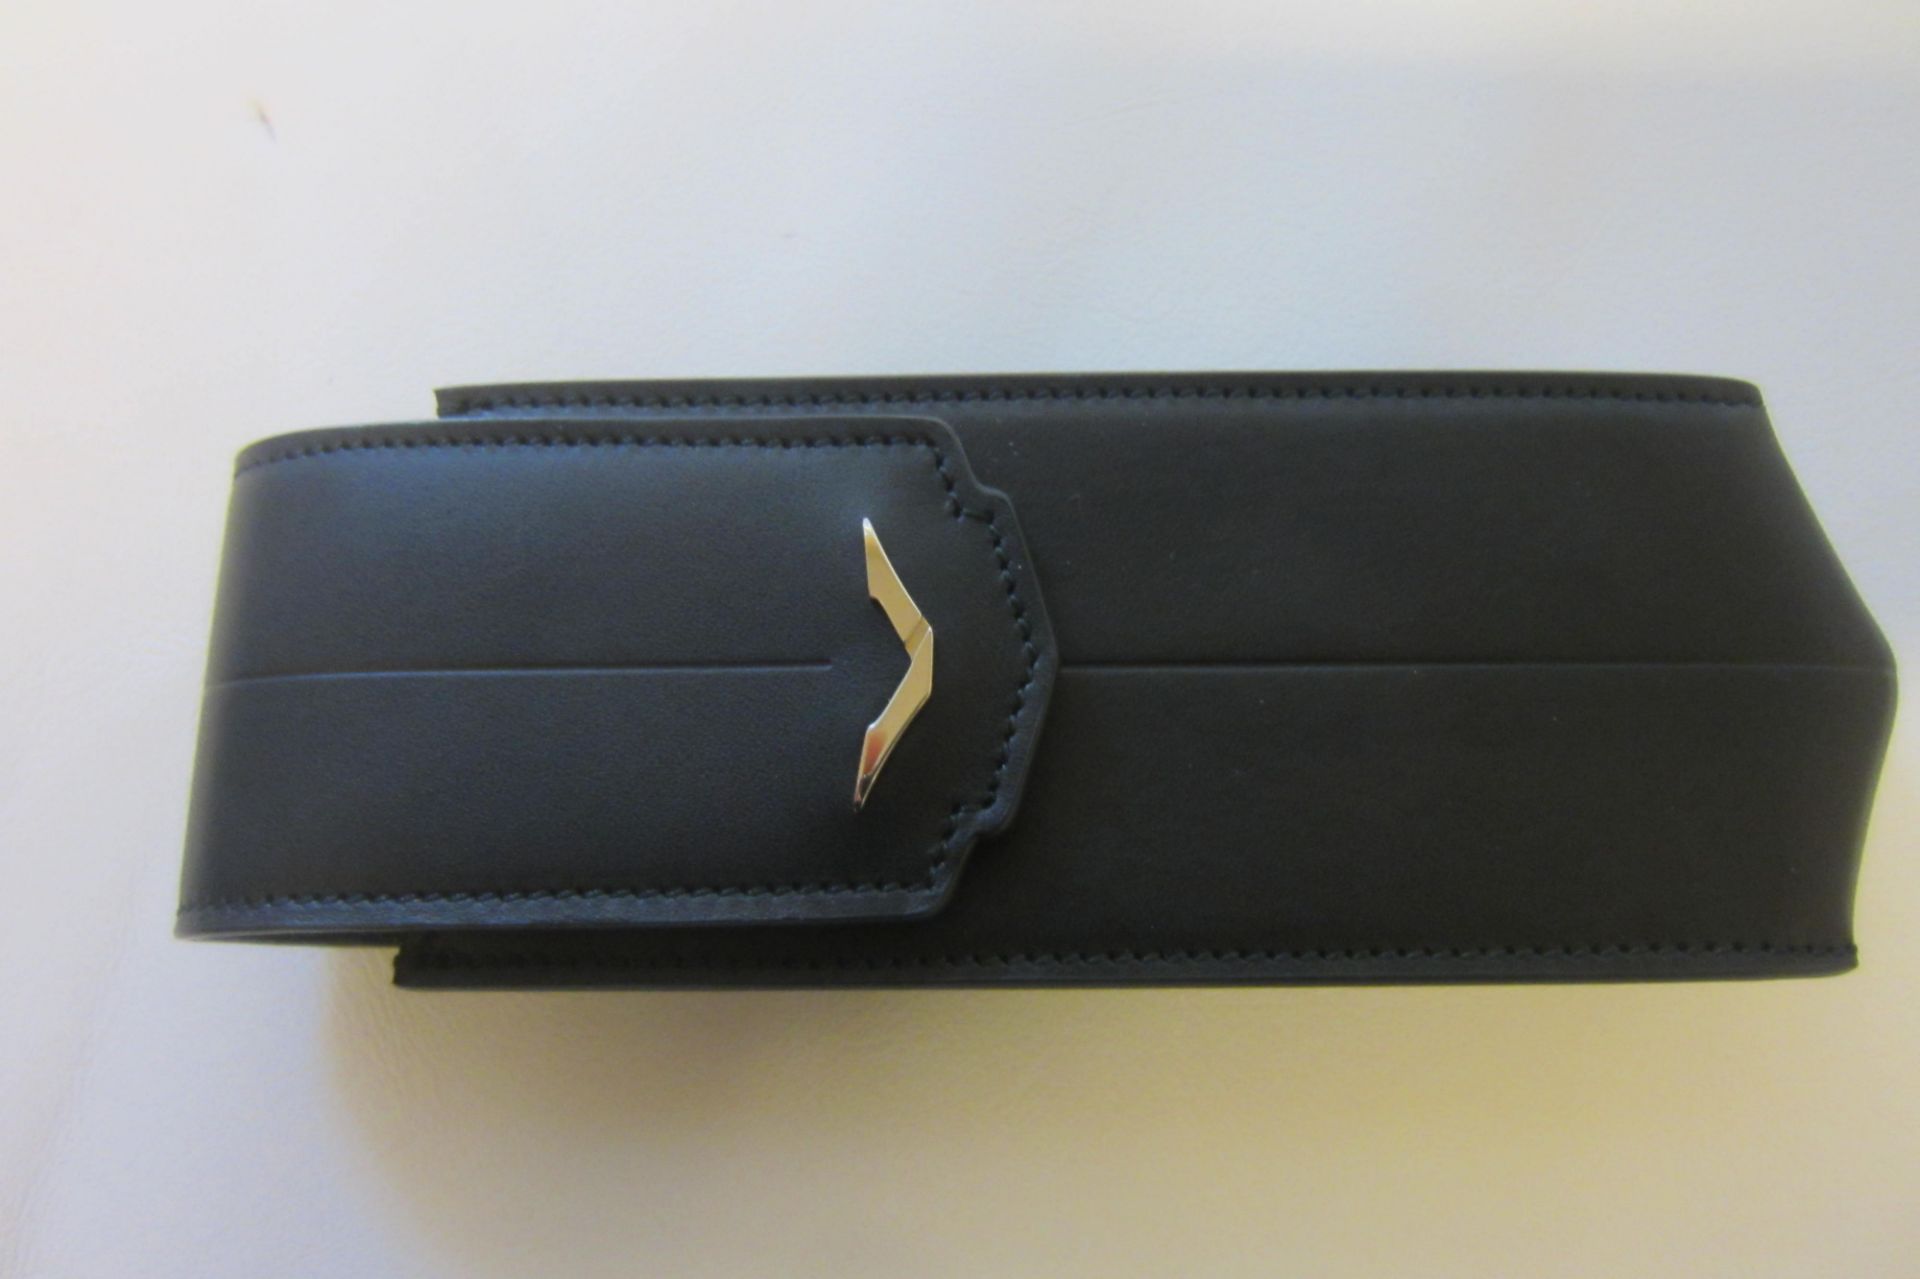 Signature S Black Leather Case with Thought to be White Gold "V" Insignia